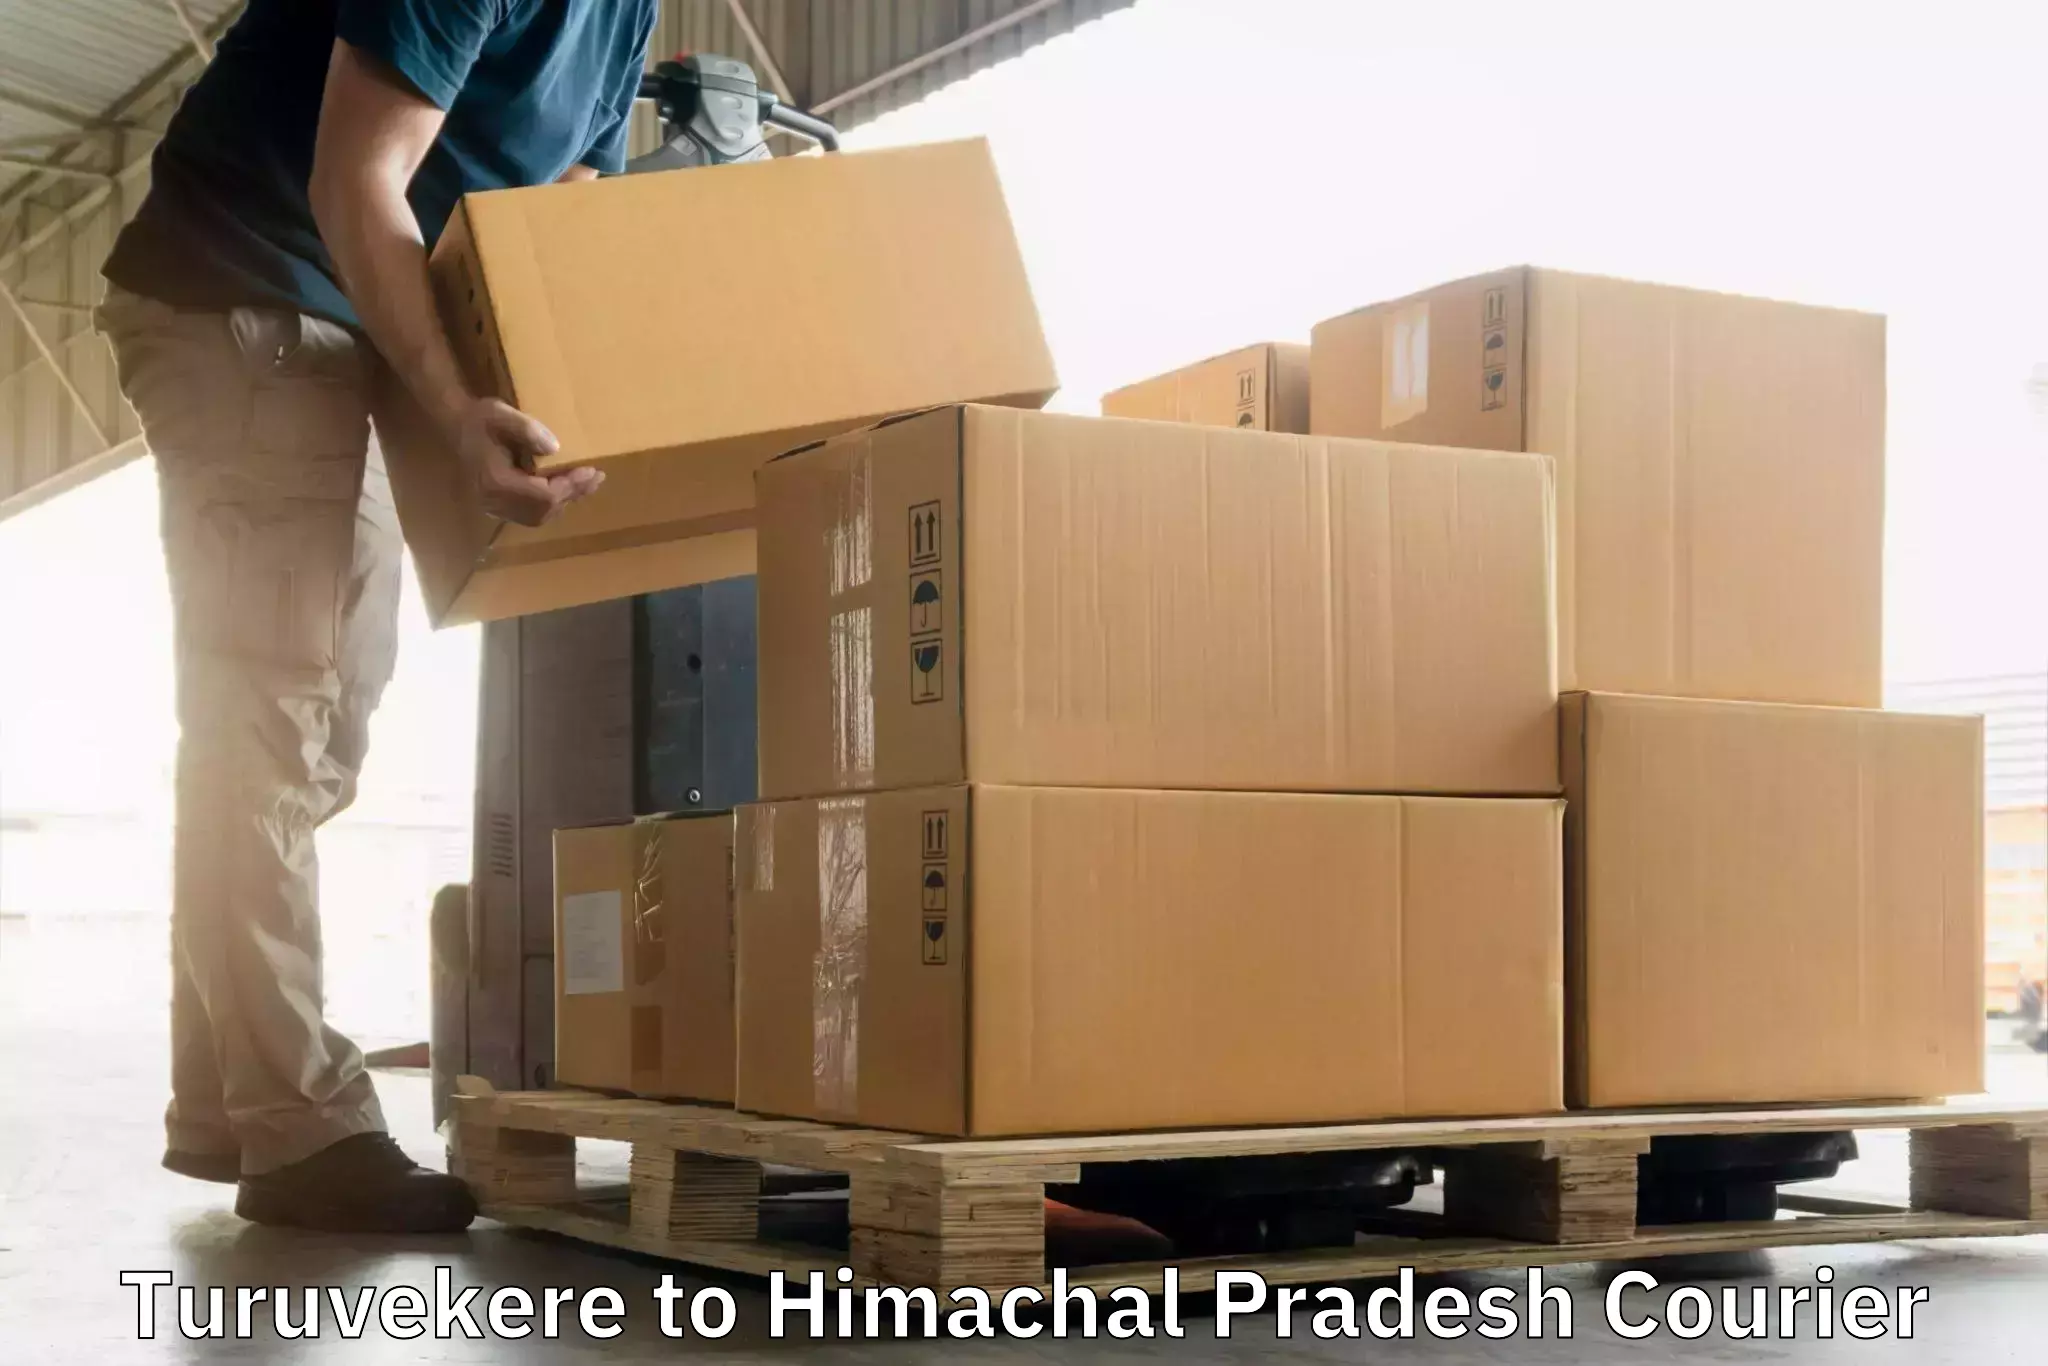 Parcel service for businesses Turuvekere to Una Himachal Pradesh